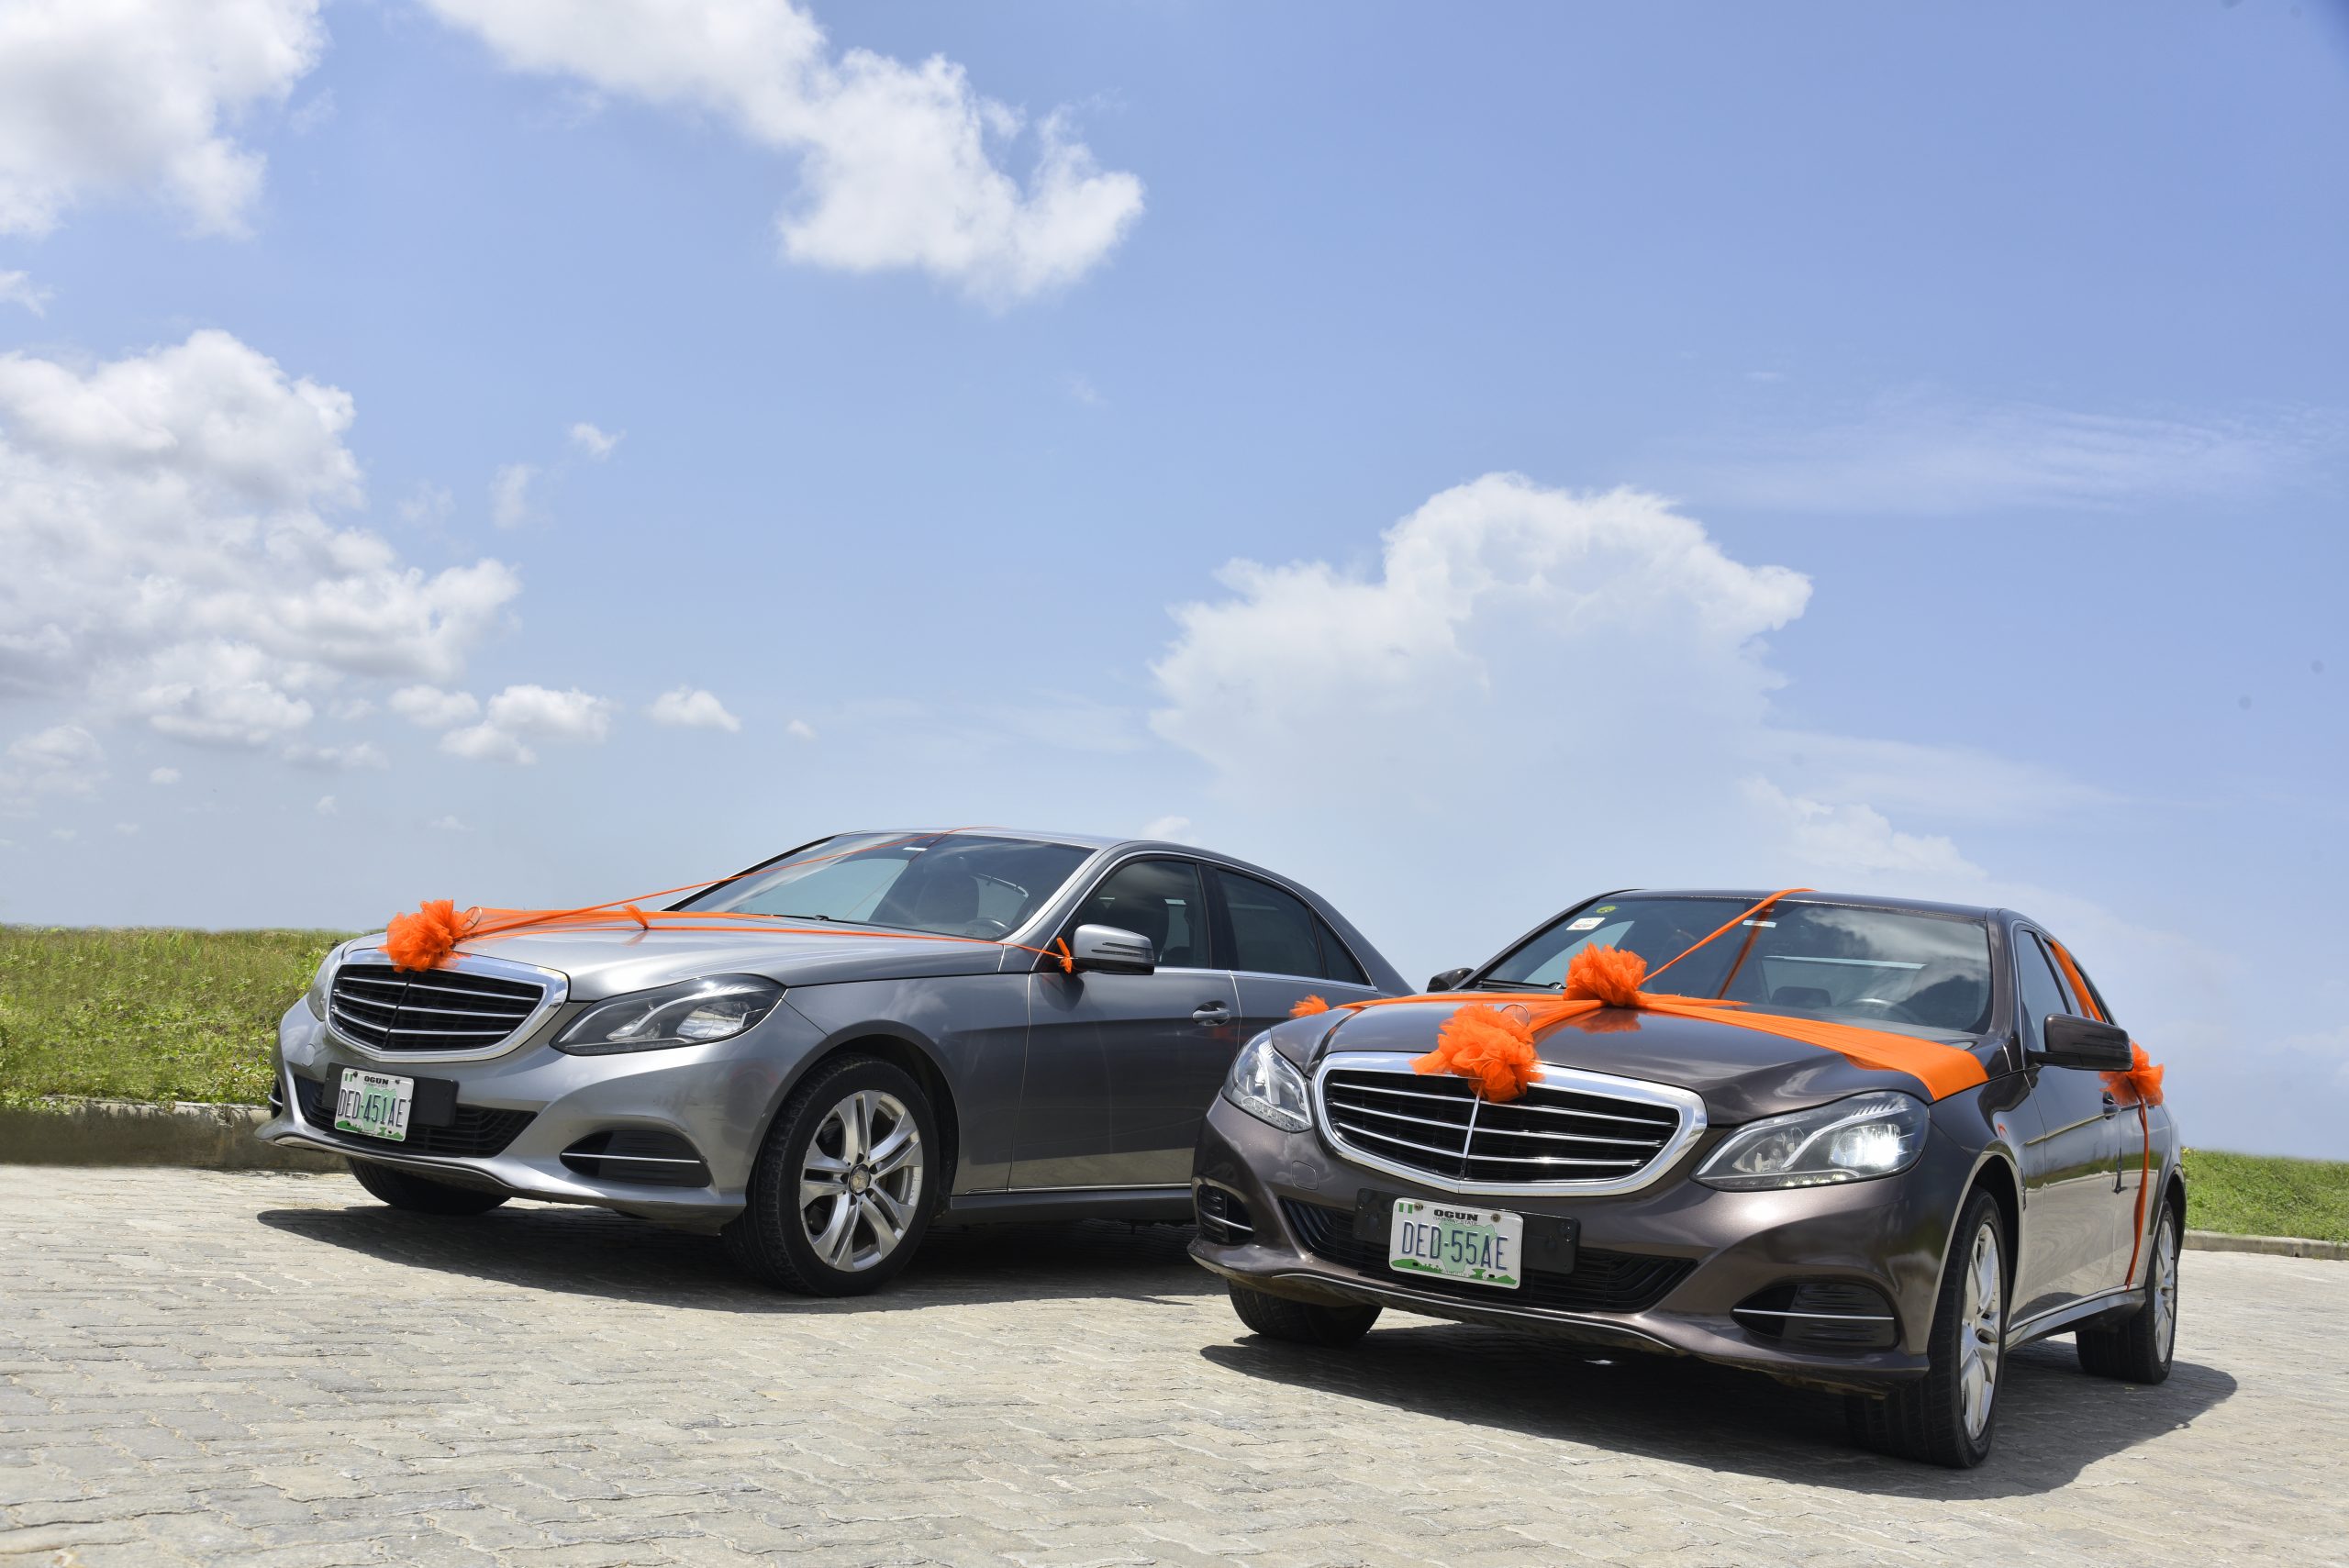 Why you should hire a chauffeur for your wedding day